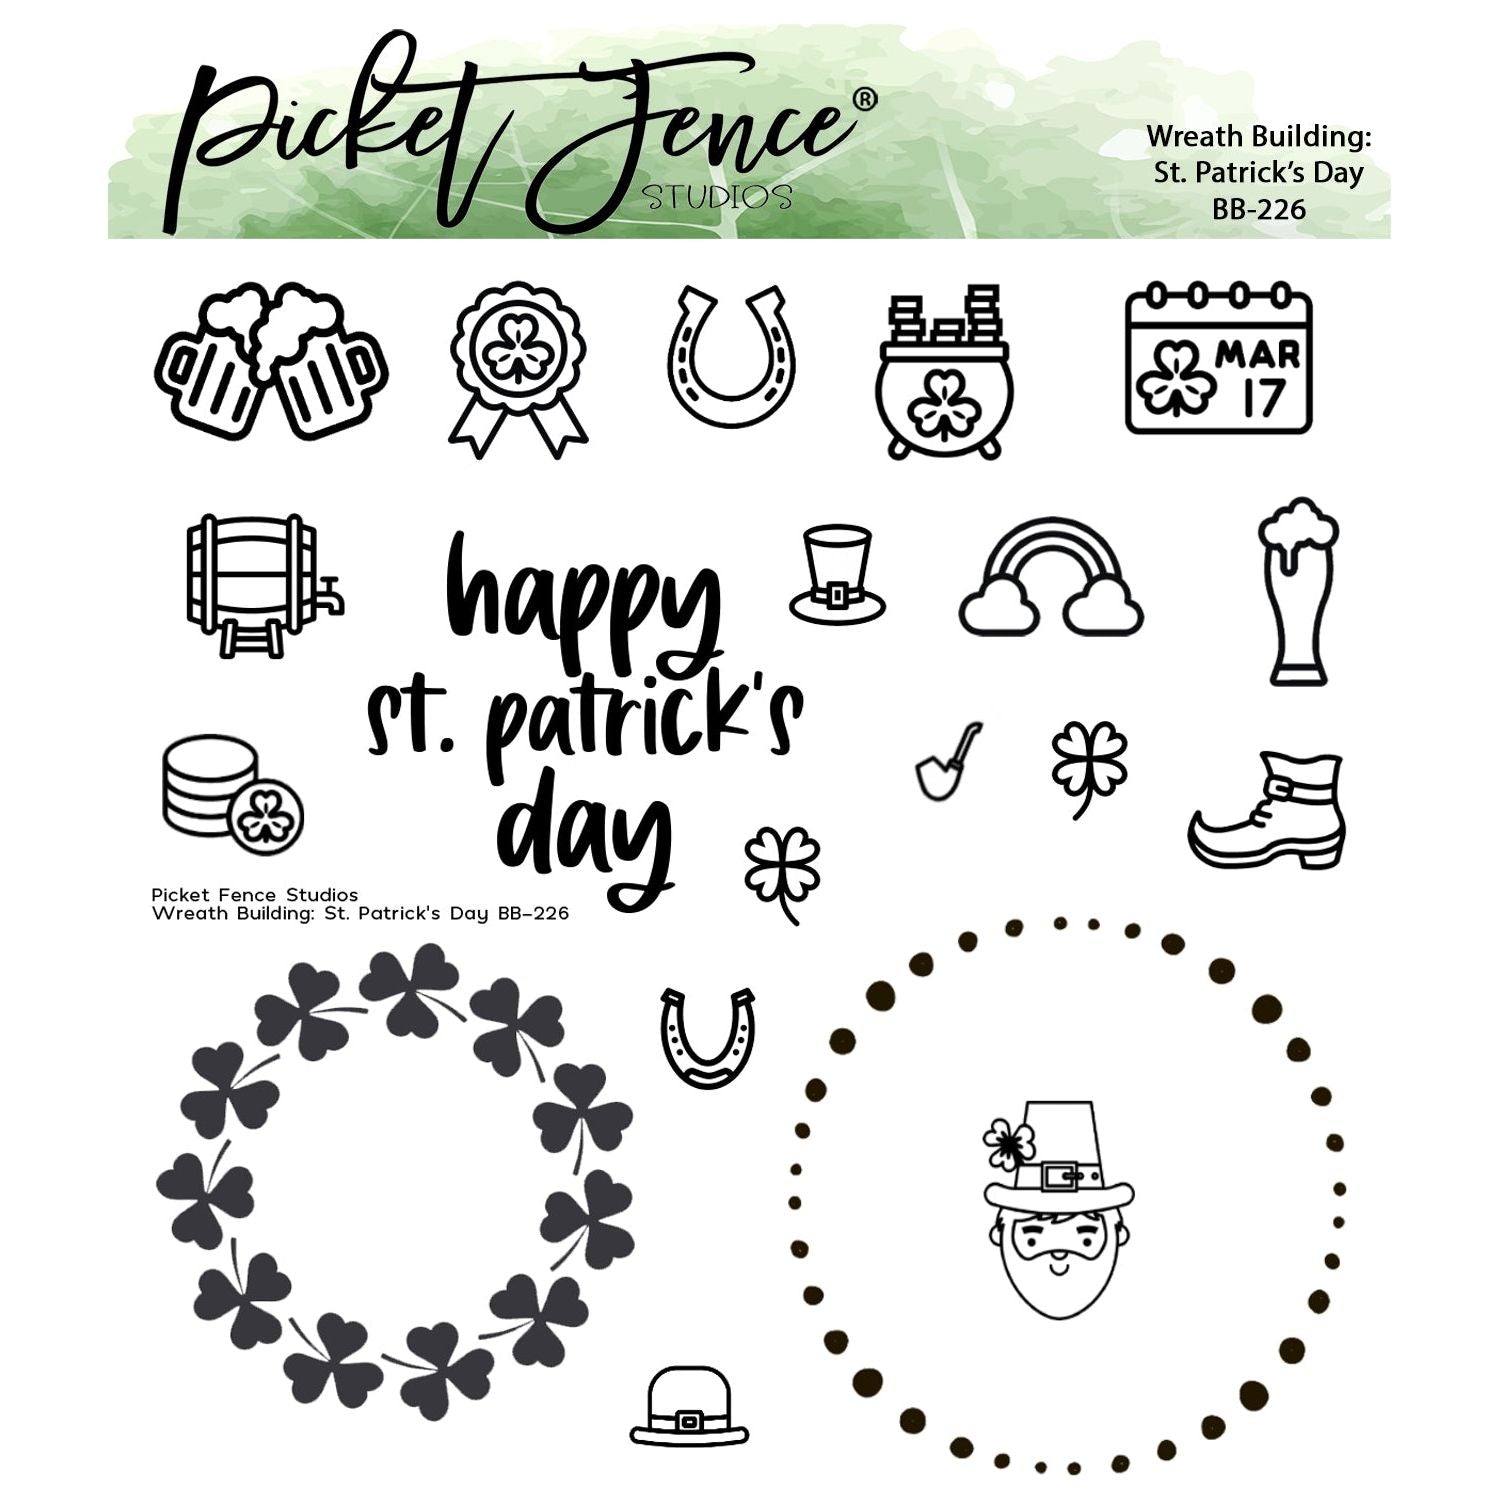 Wreath Building: St. Patrick's Day